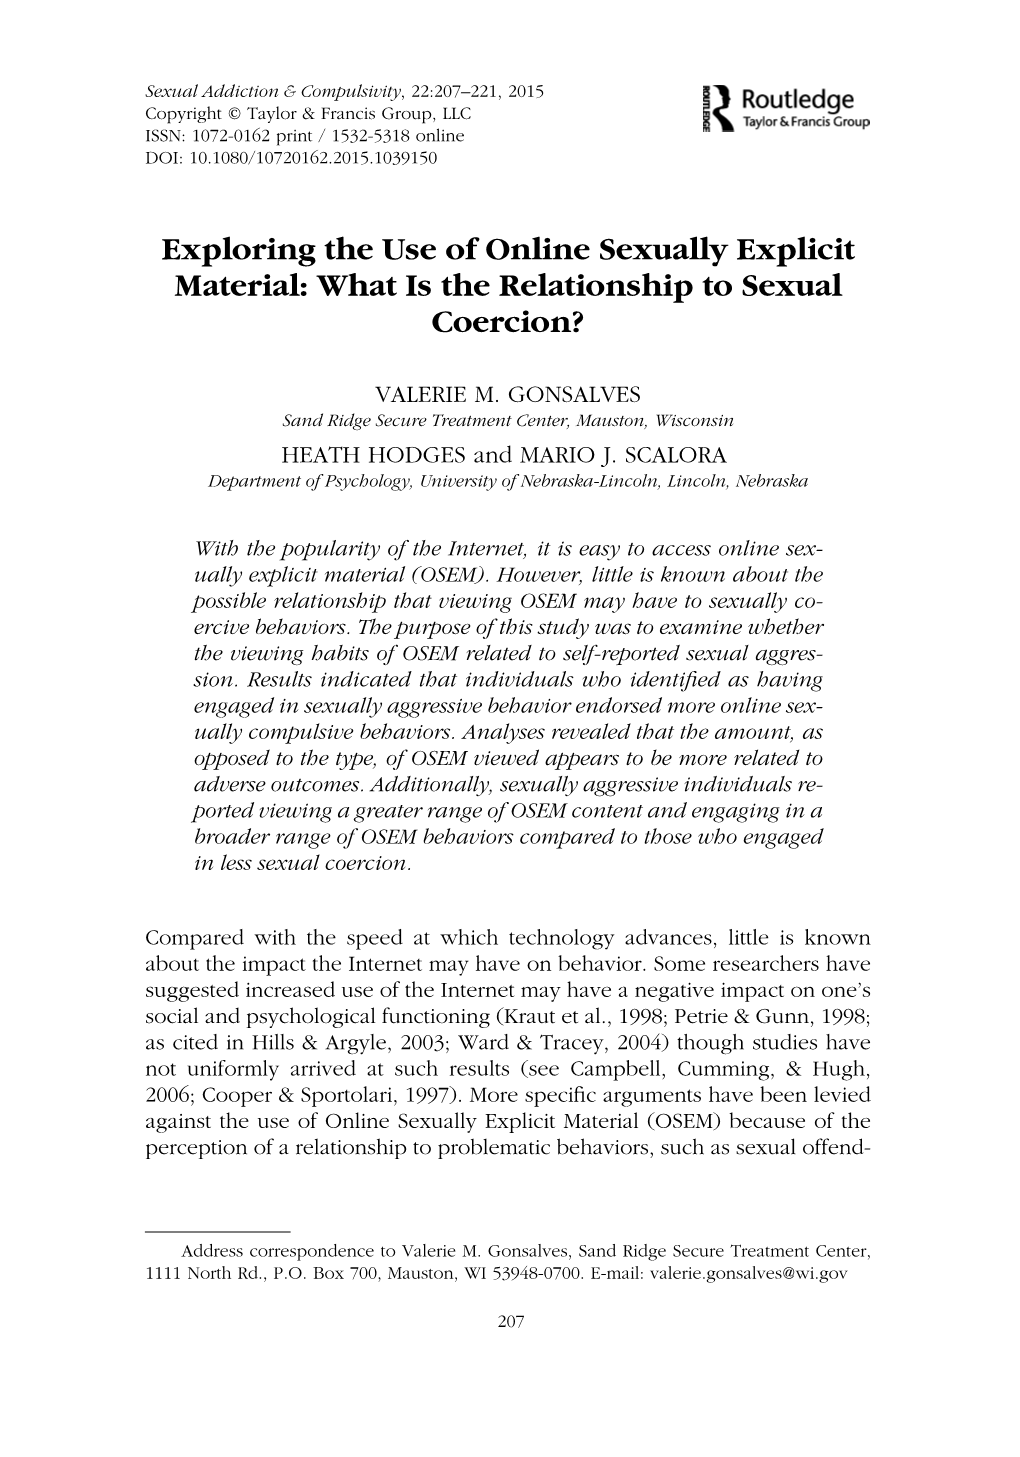 Exploring the Use of Online Sexually Explicit Material: What Is the Relationship to Sexual Coercion?